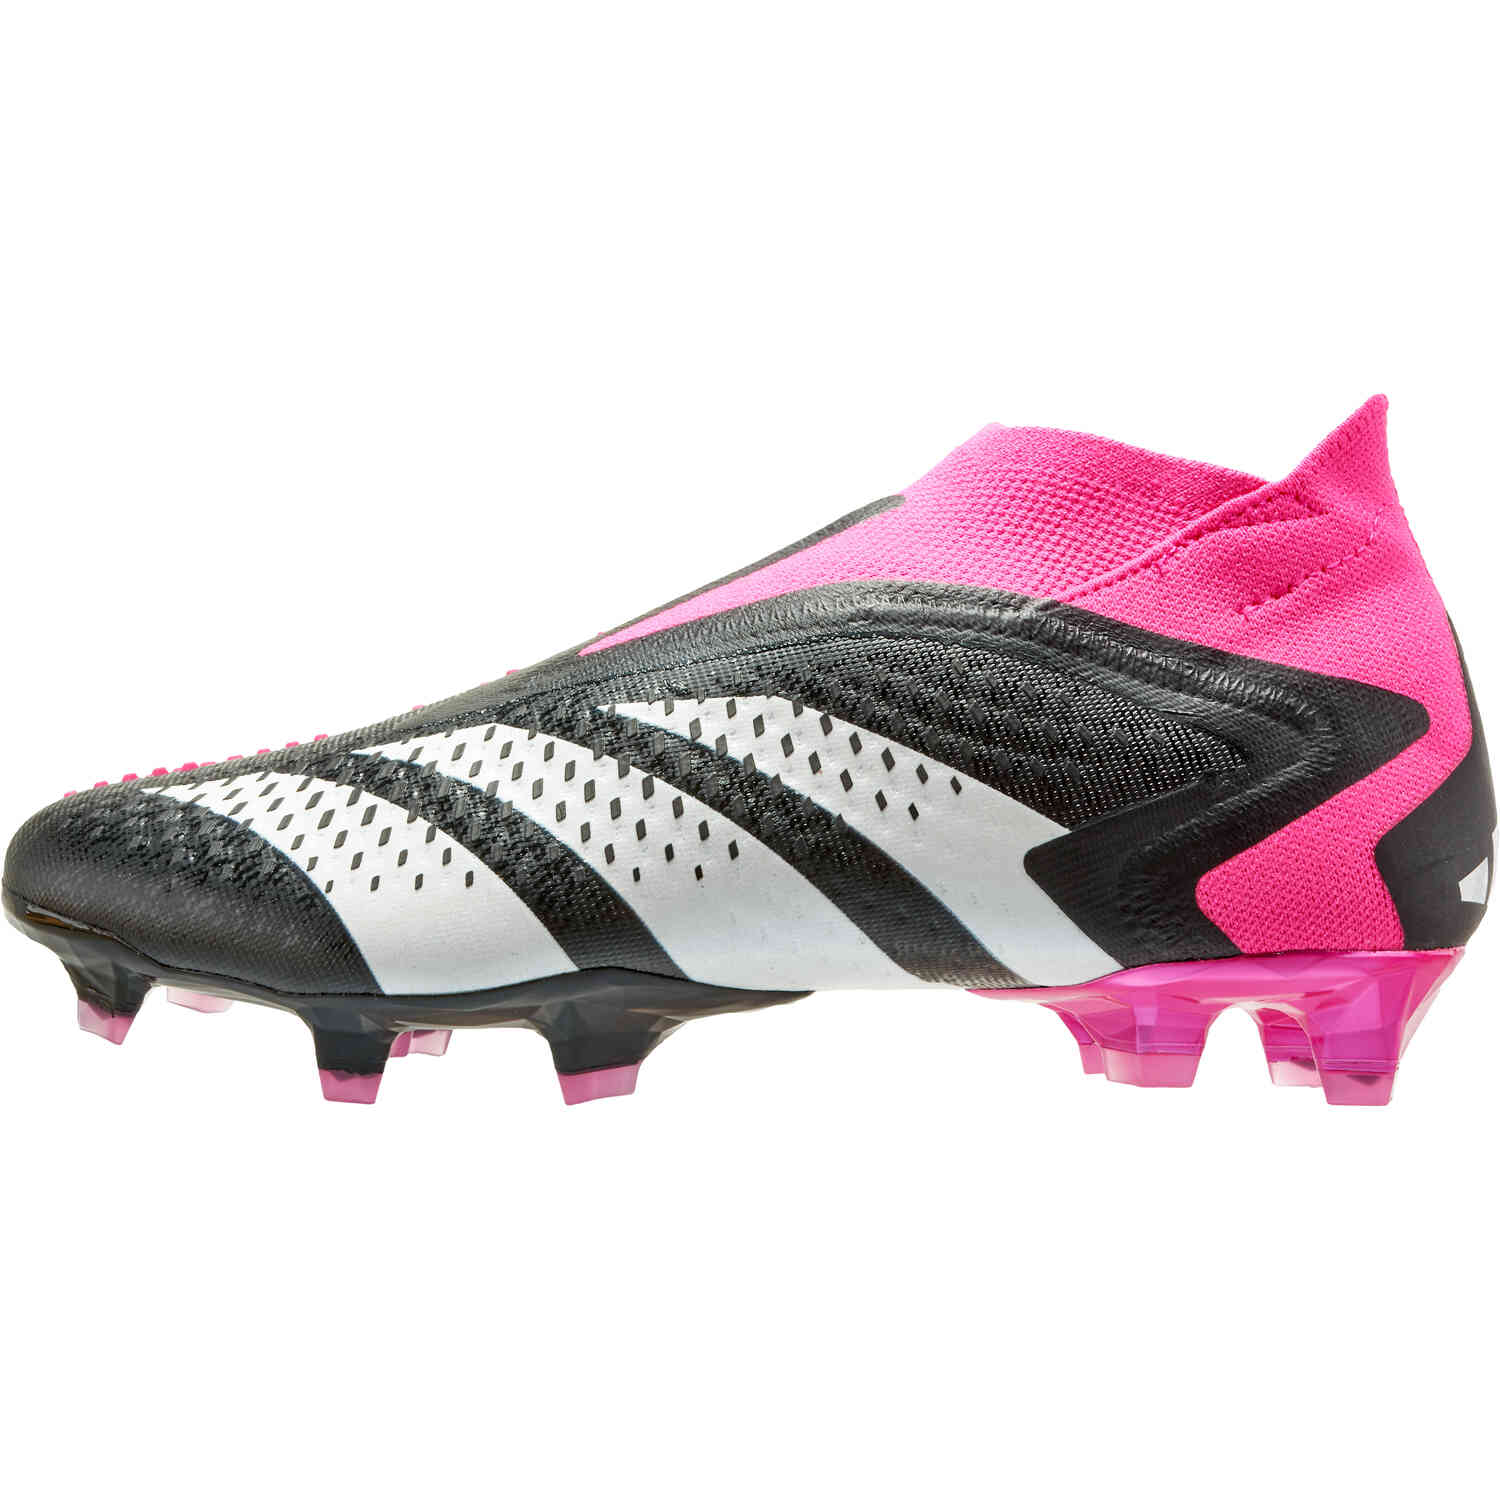 adidas Predator Accuracy+ FG Firm Ground Soccer Cleats - Black, White Pink - Soccer Master